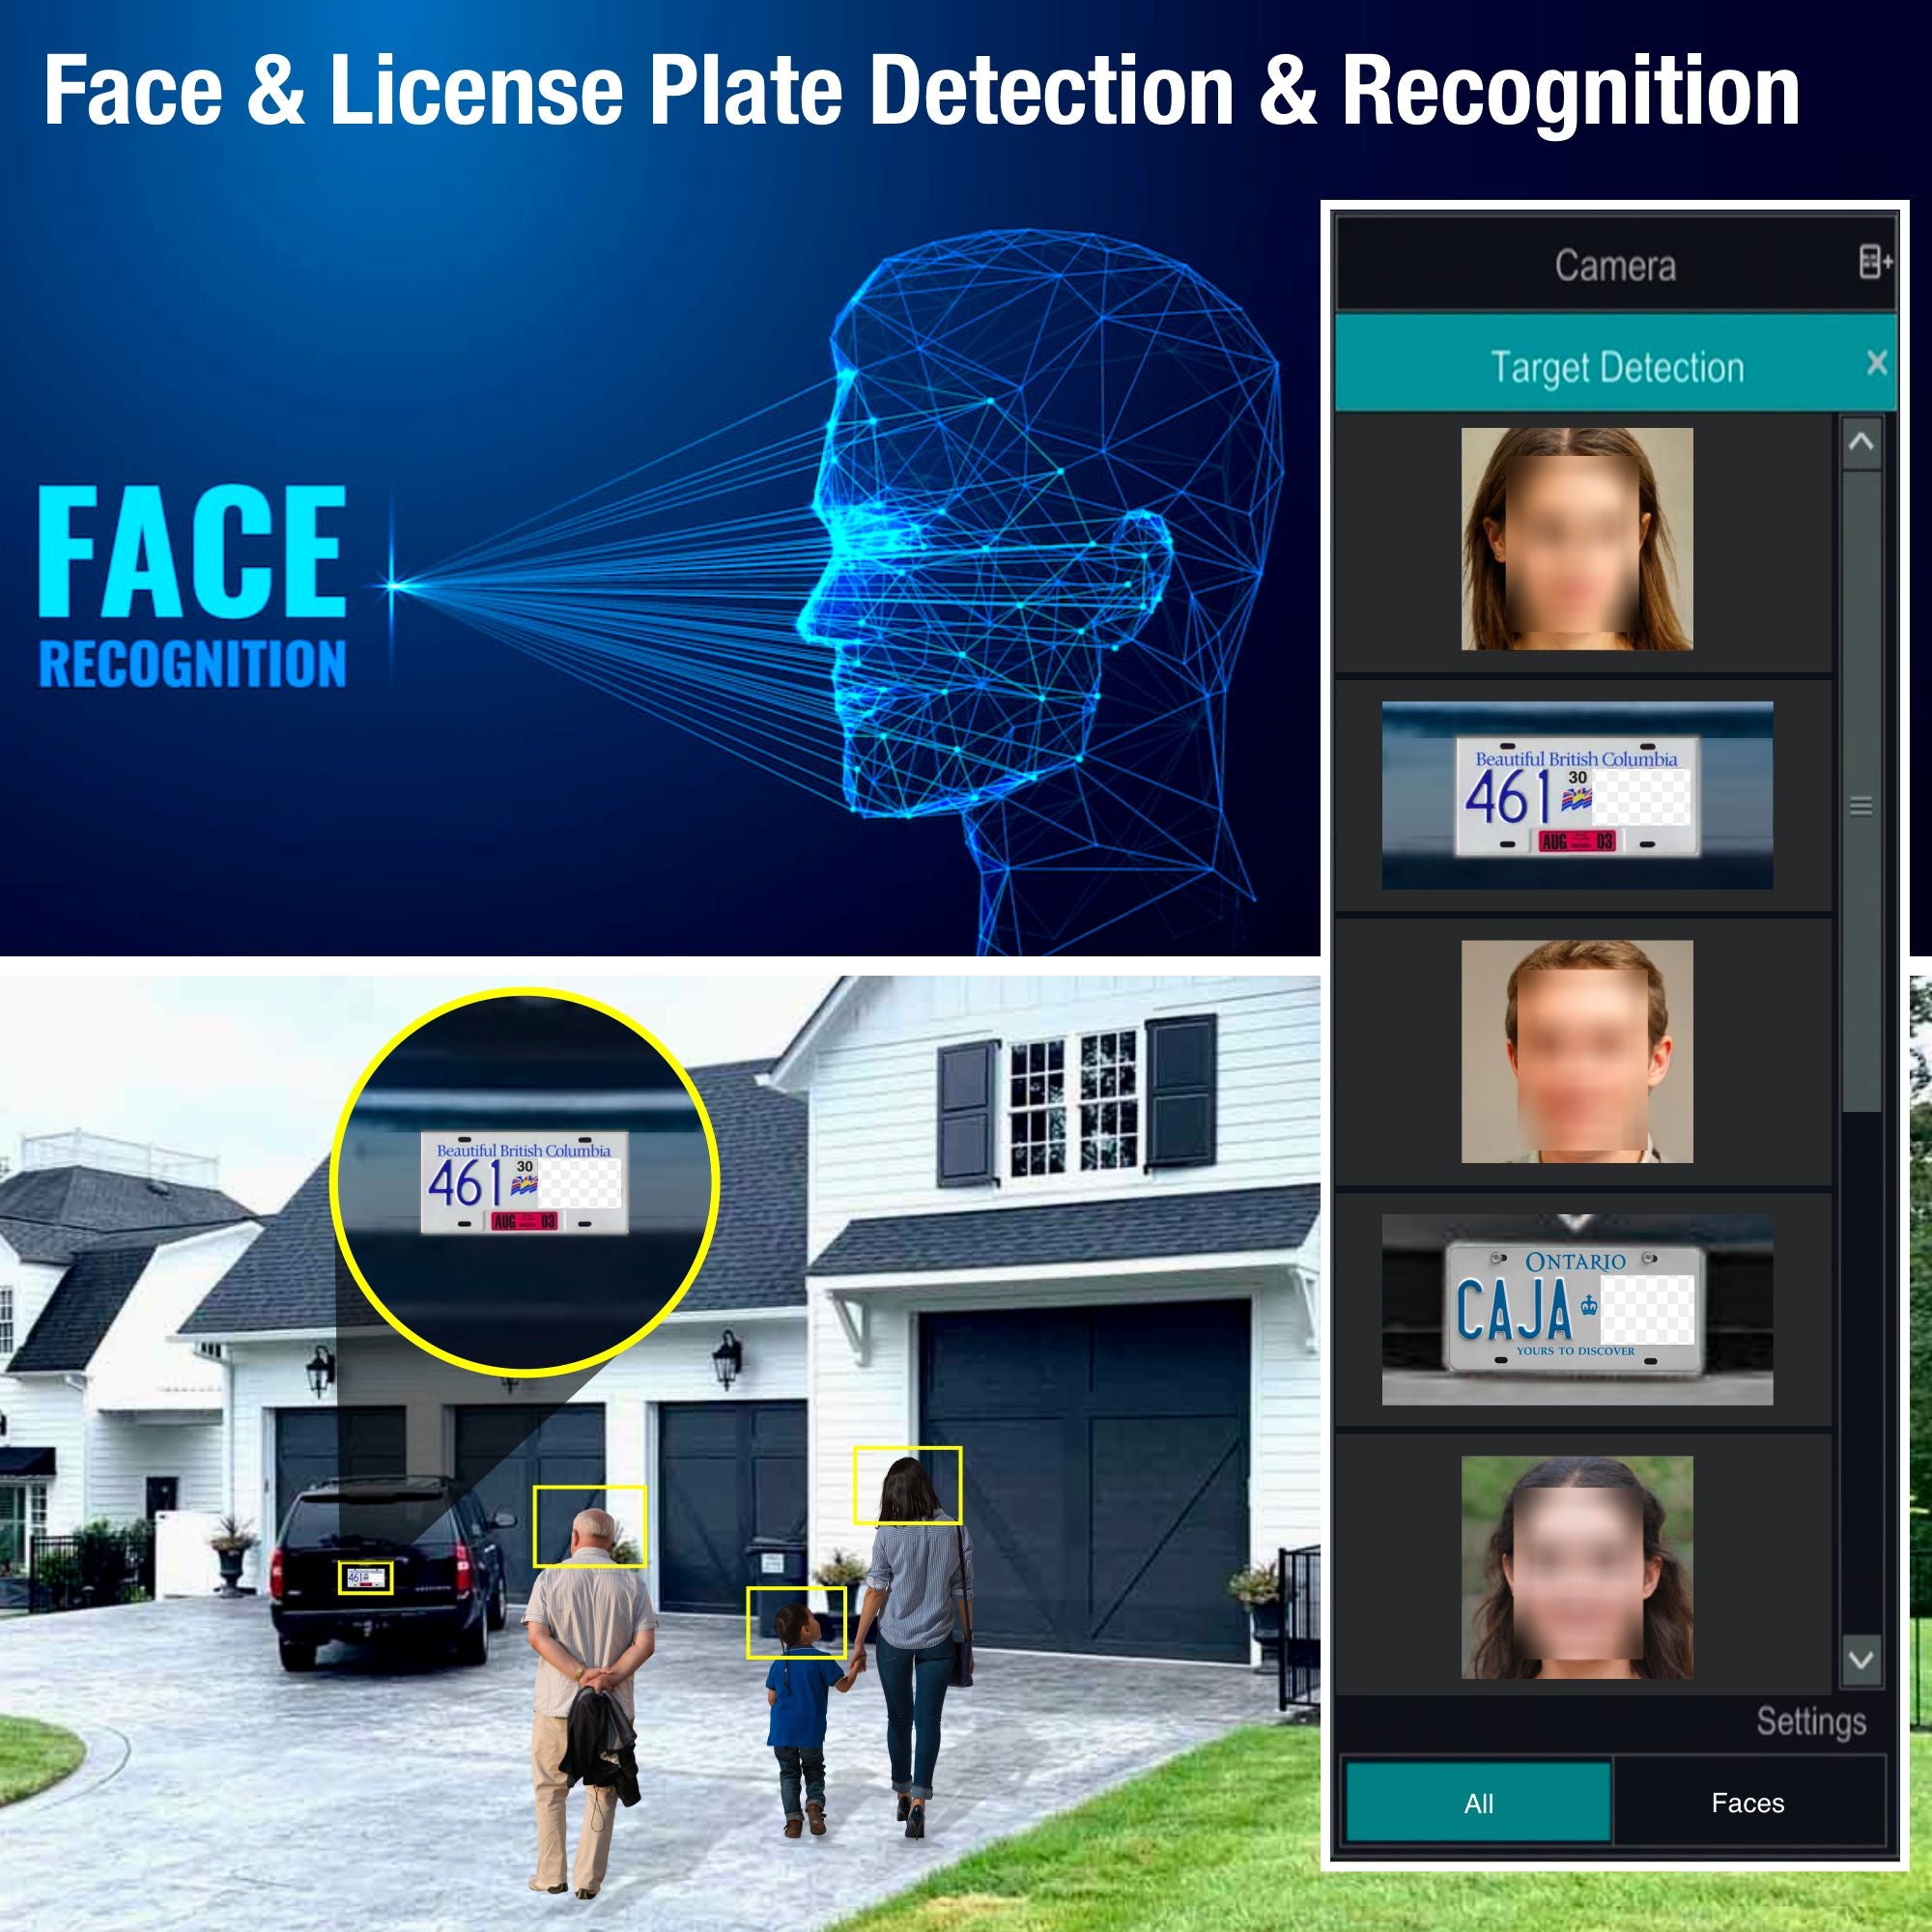 Security Camera System with Face Detection and License Plate Detection Surveillance